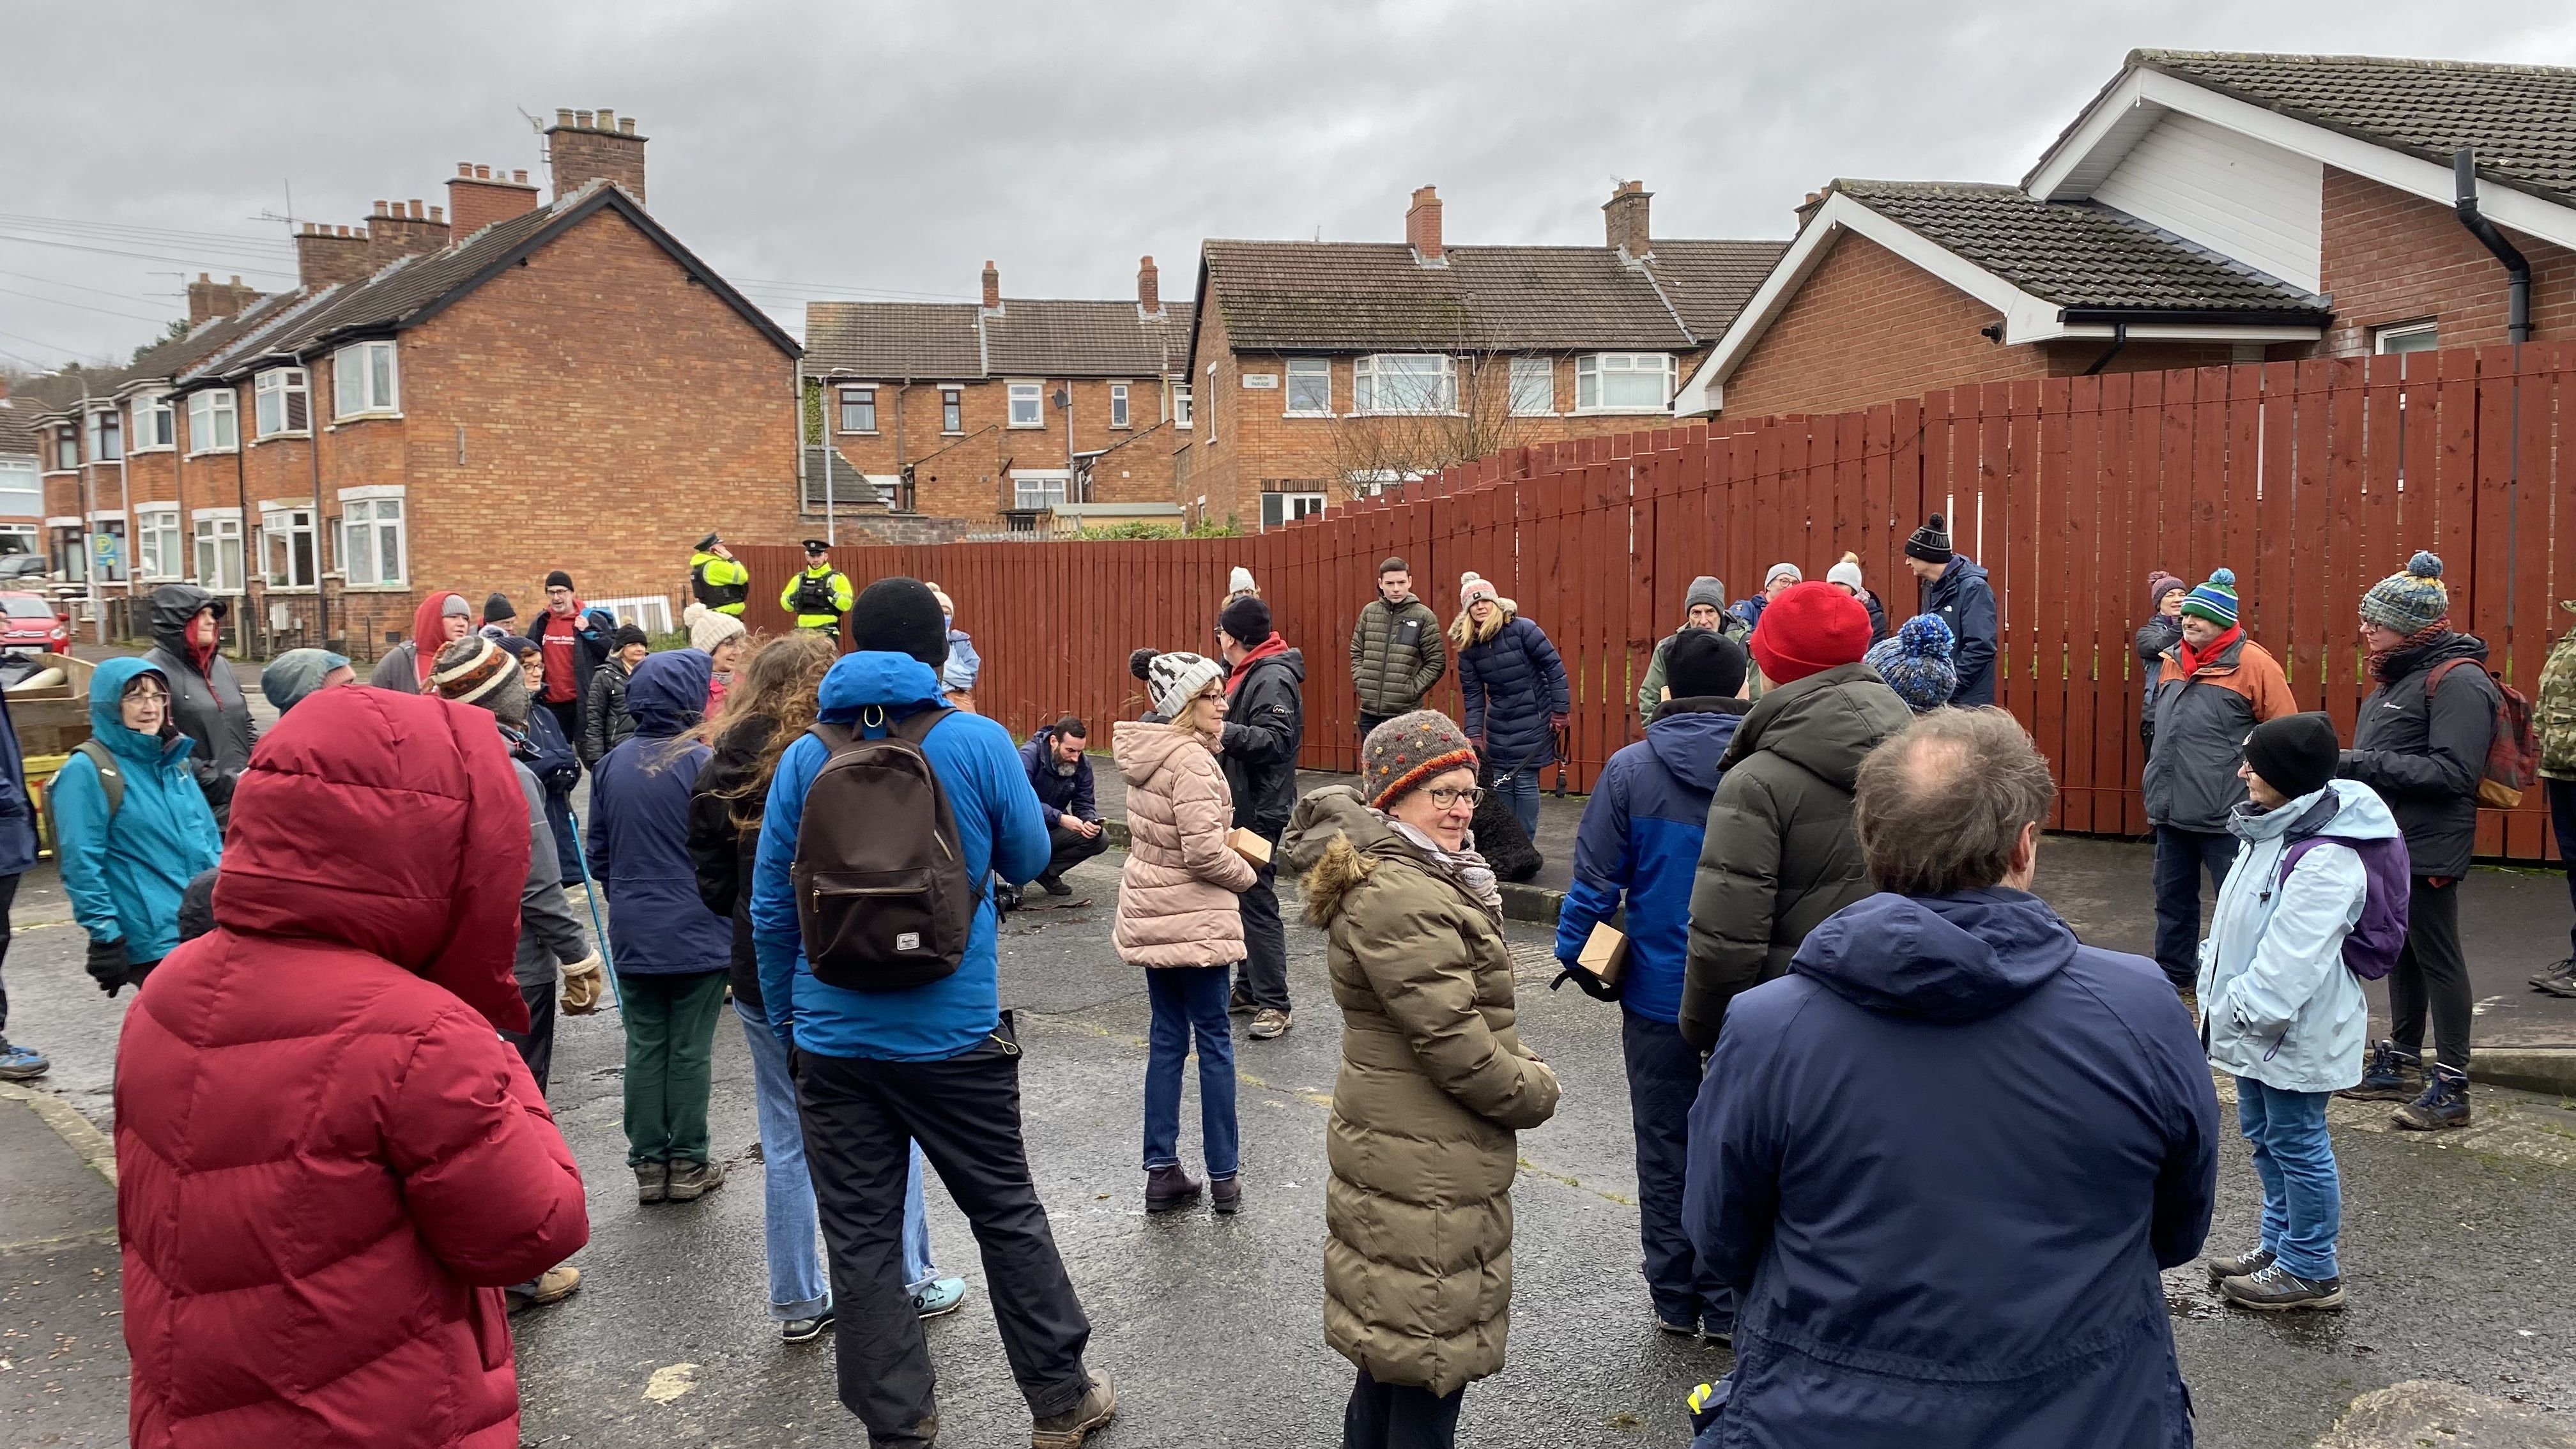 PEACE WALKERS: Participants in the 4 Corners Festival took part in a Wander Walk from Glencairn to Farset on Sunday, pausing at the peace line at Workman Avenue